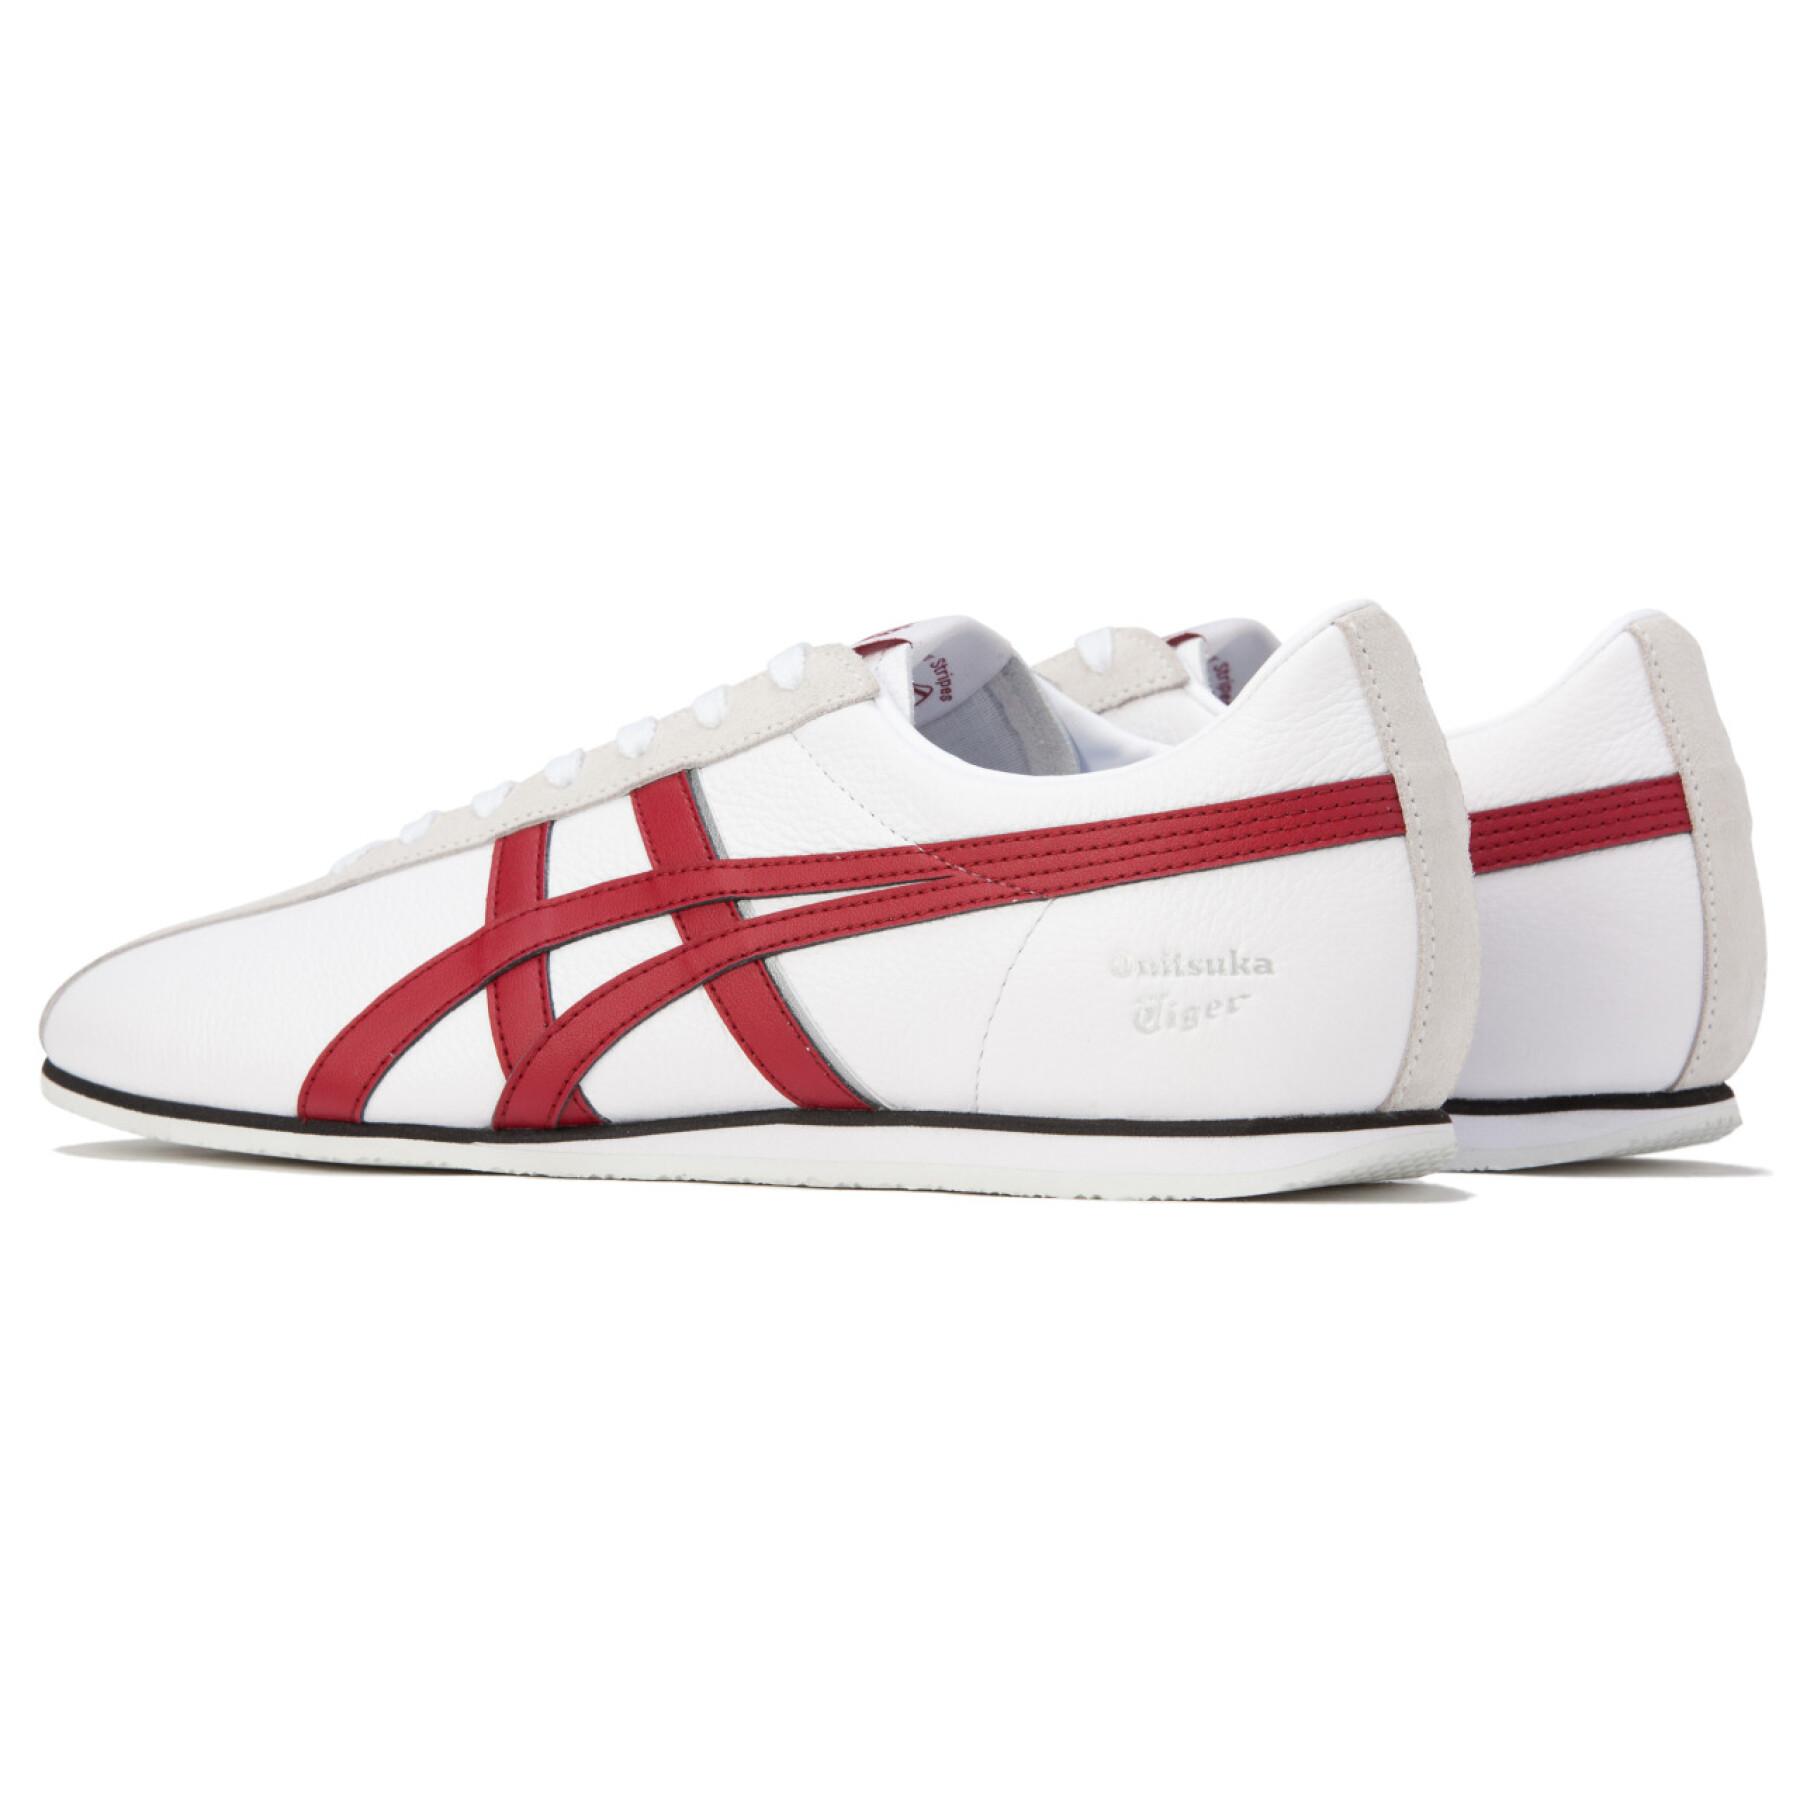 Trainers Onitsuka Tiger Fb Trainer